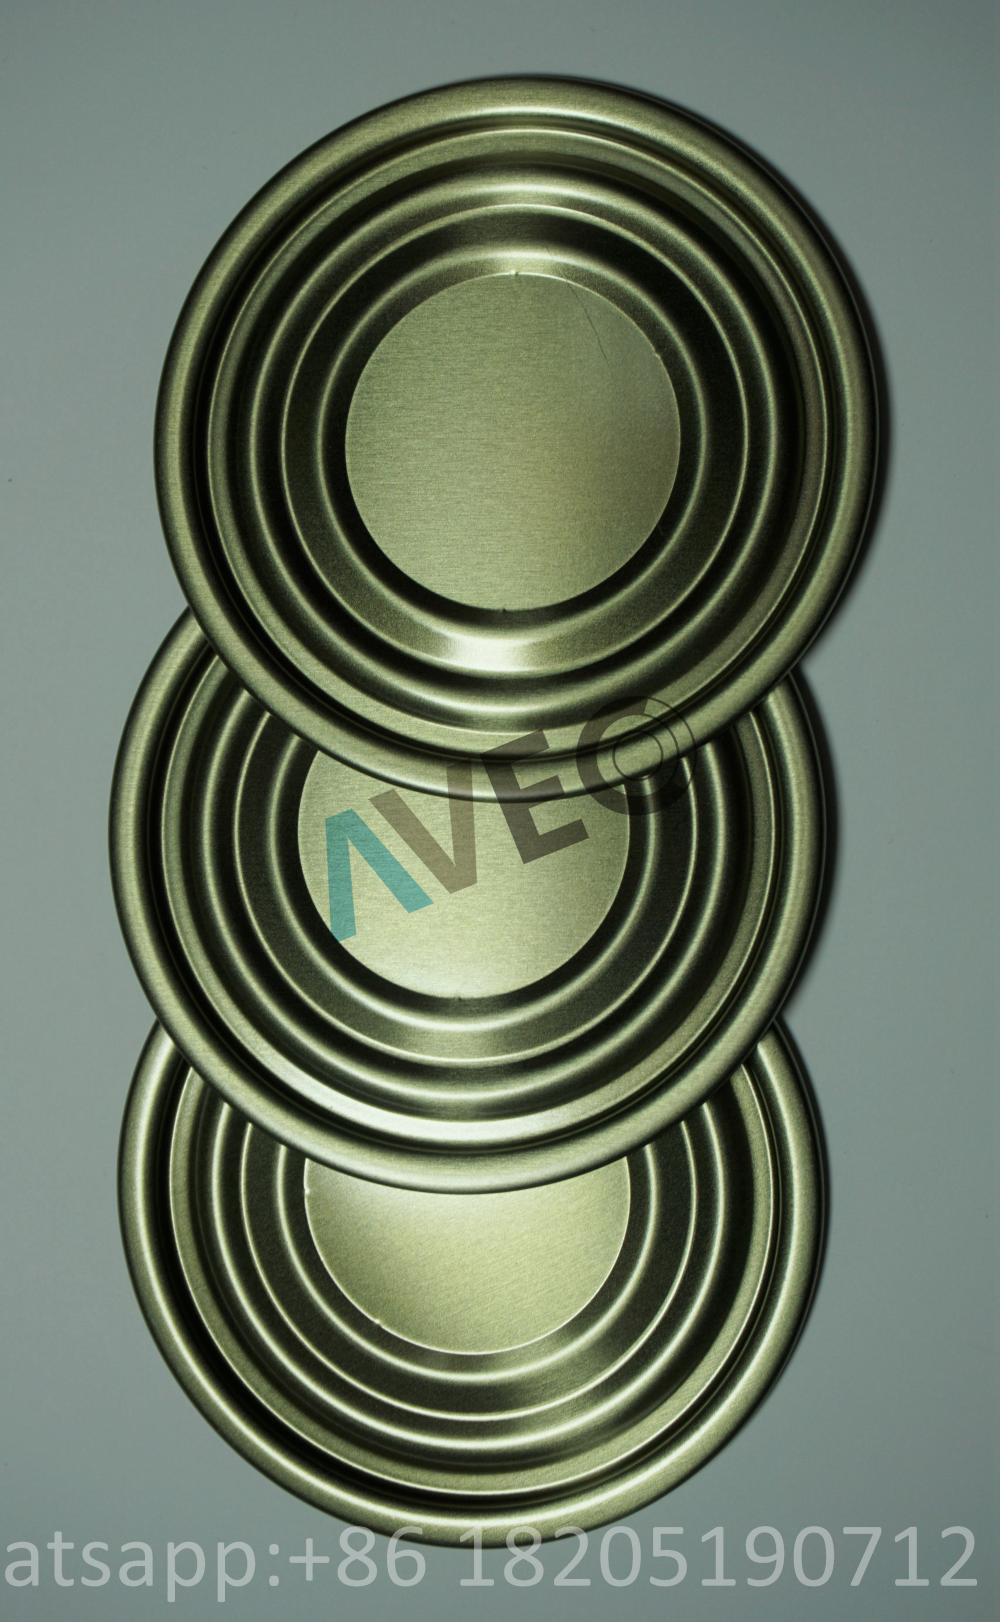 Tinplate bottom ends for canned food